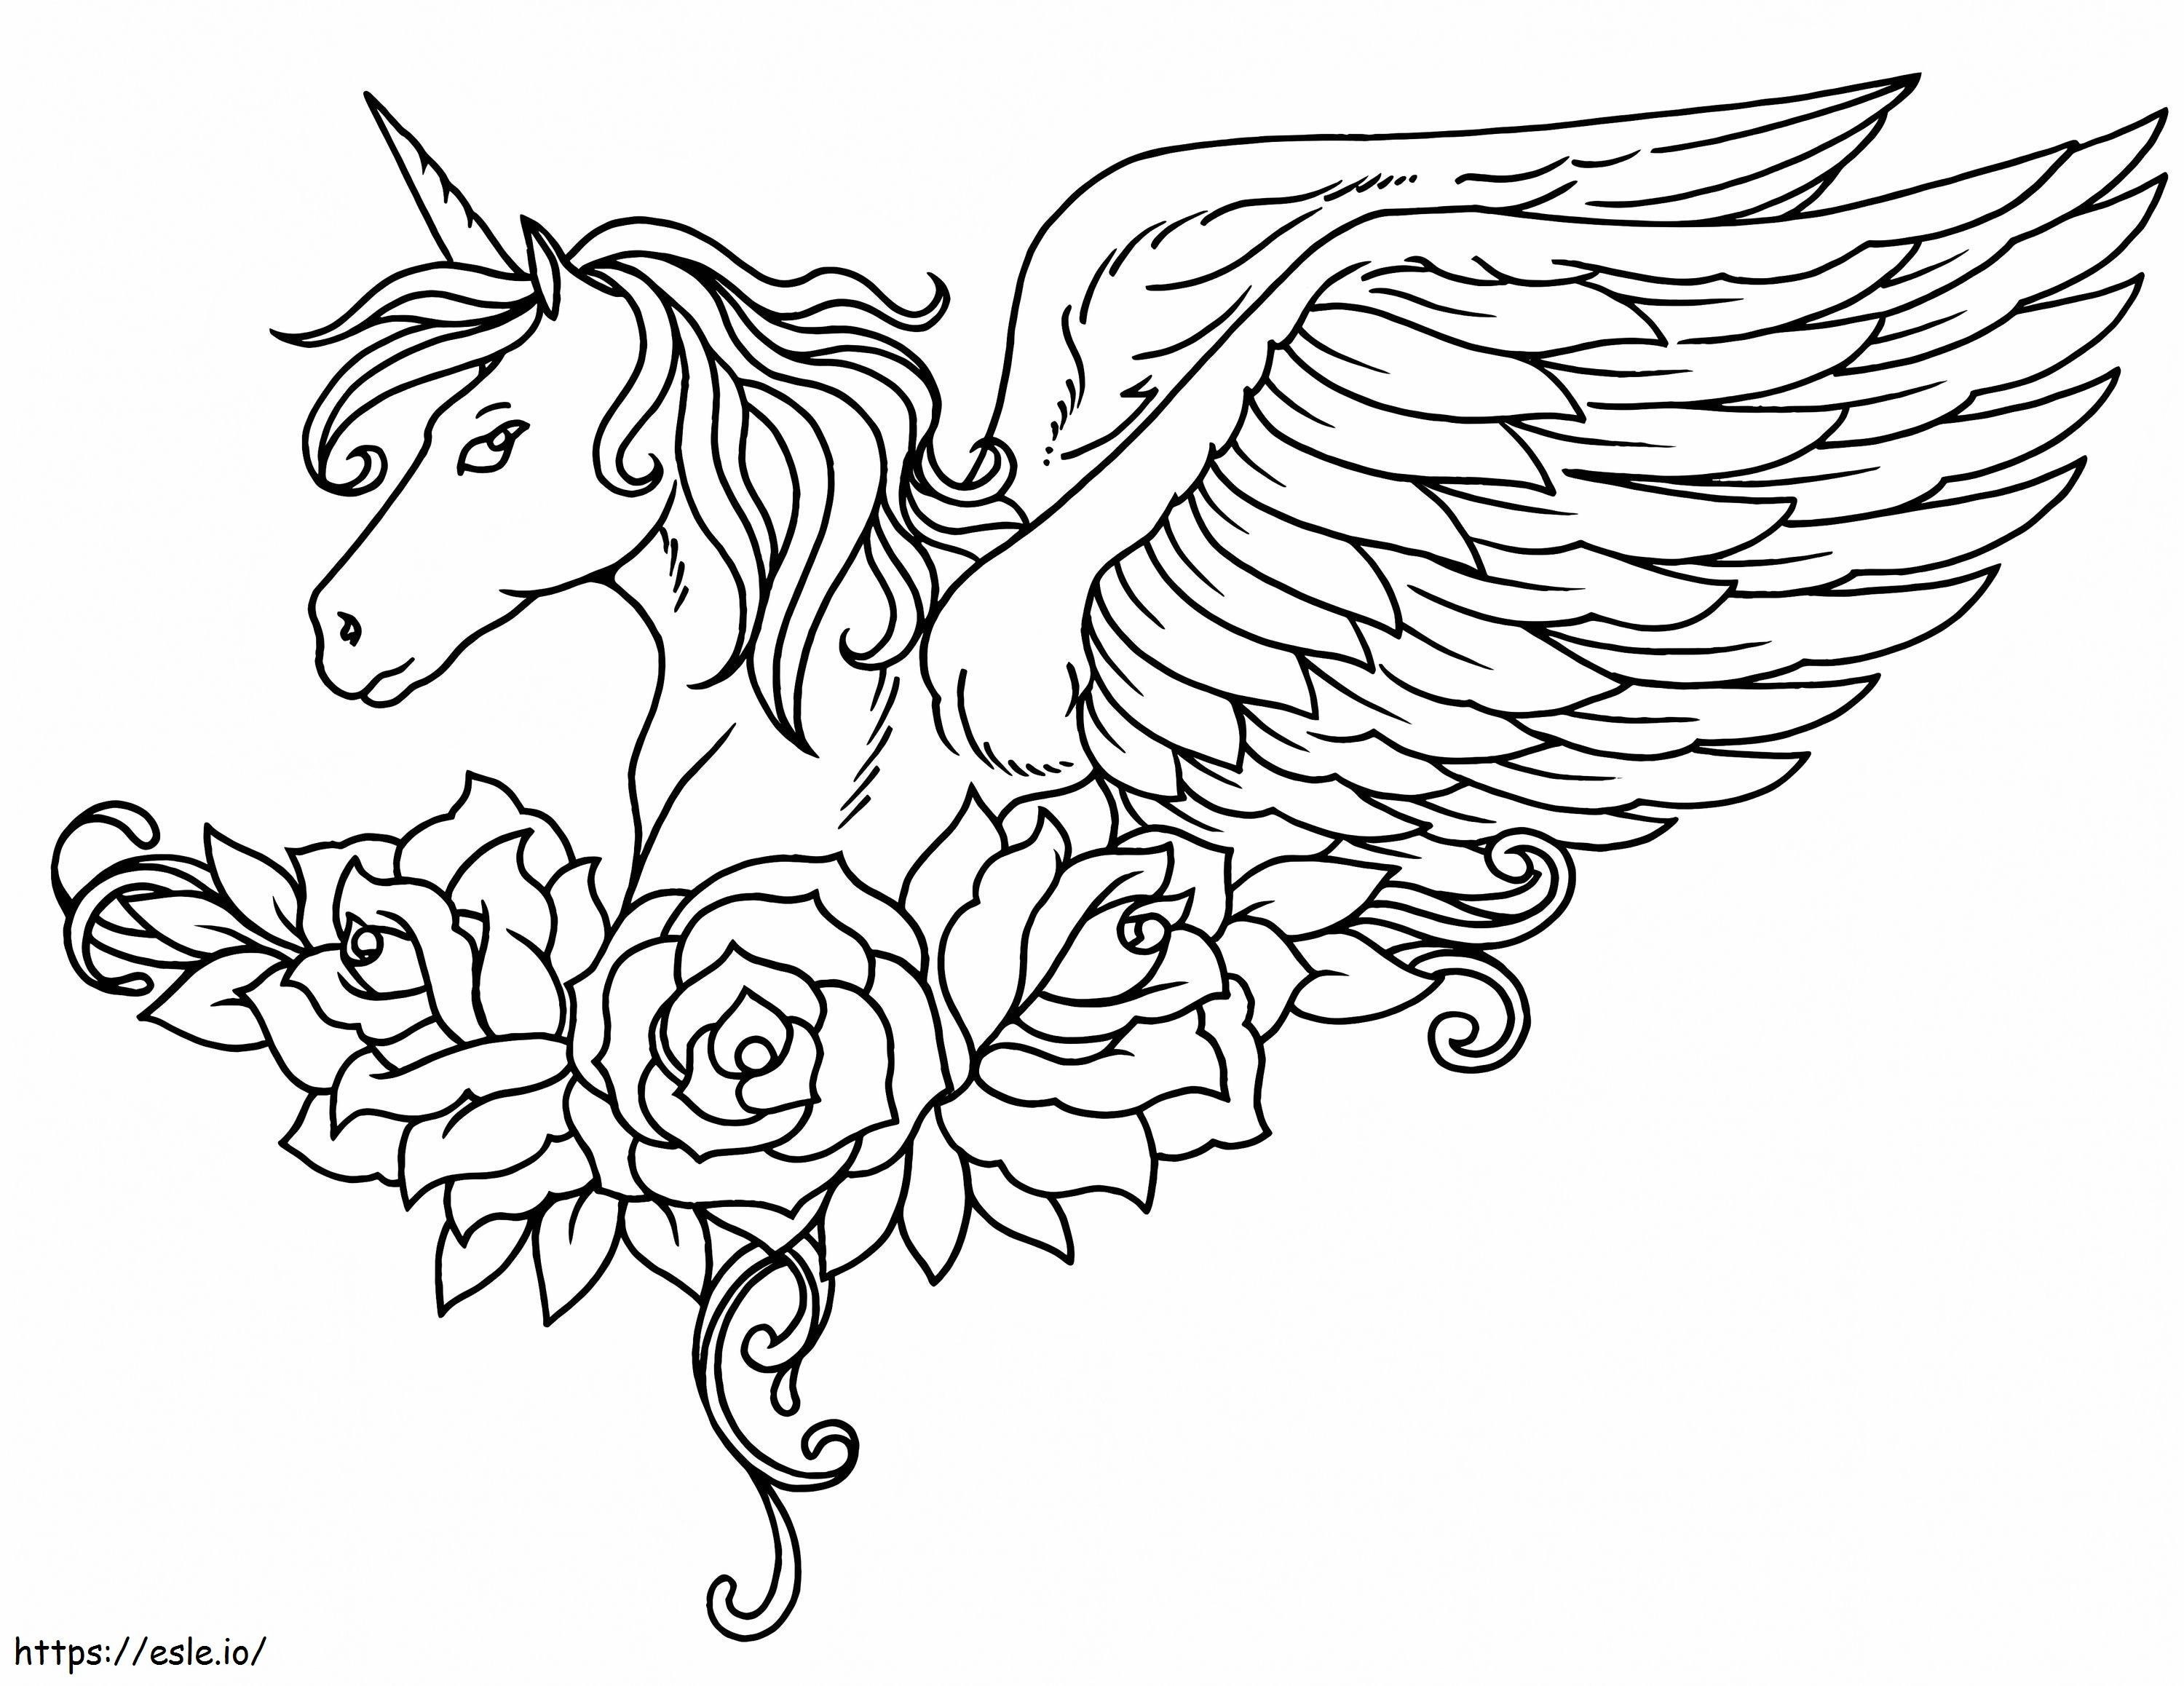 Winged Unicorn With Flowers coloring page